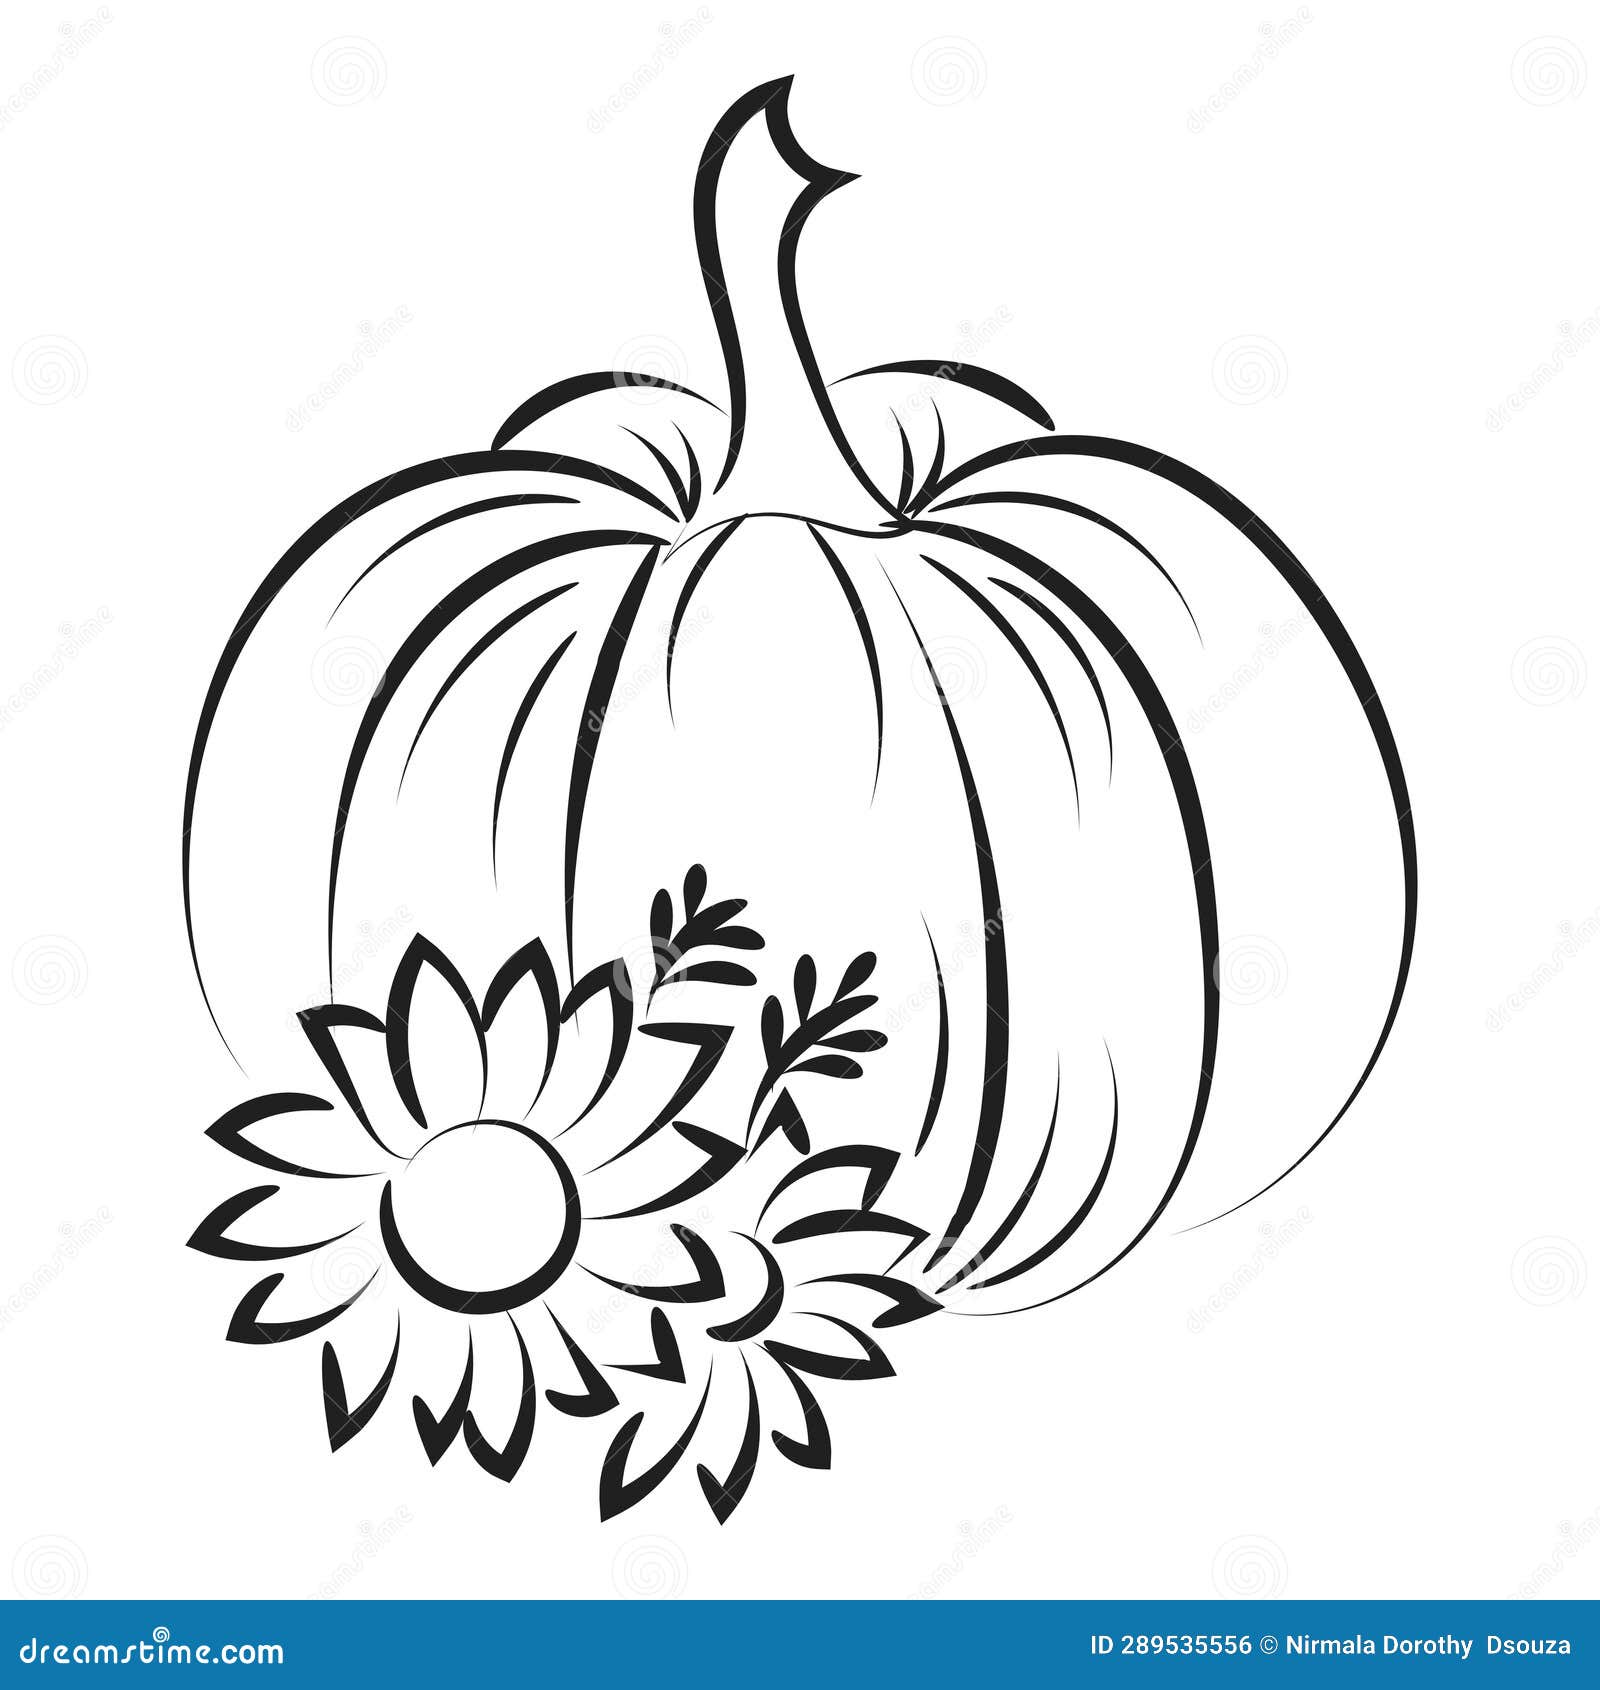 Printable pumpkin coloring pages for kids stock vector